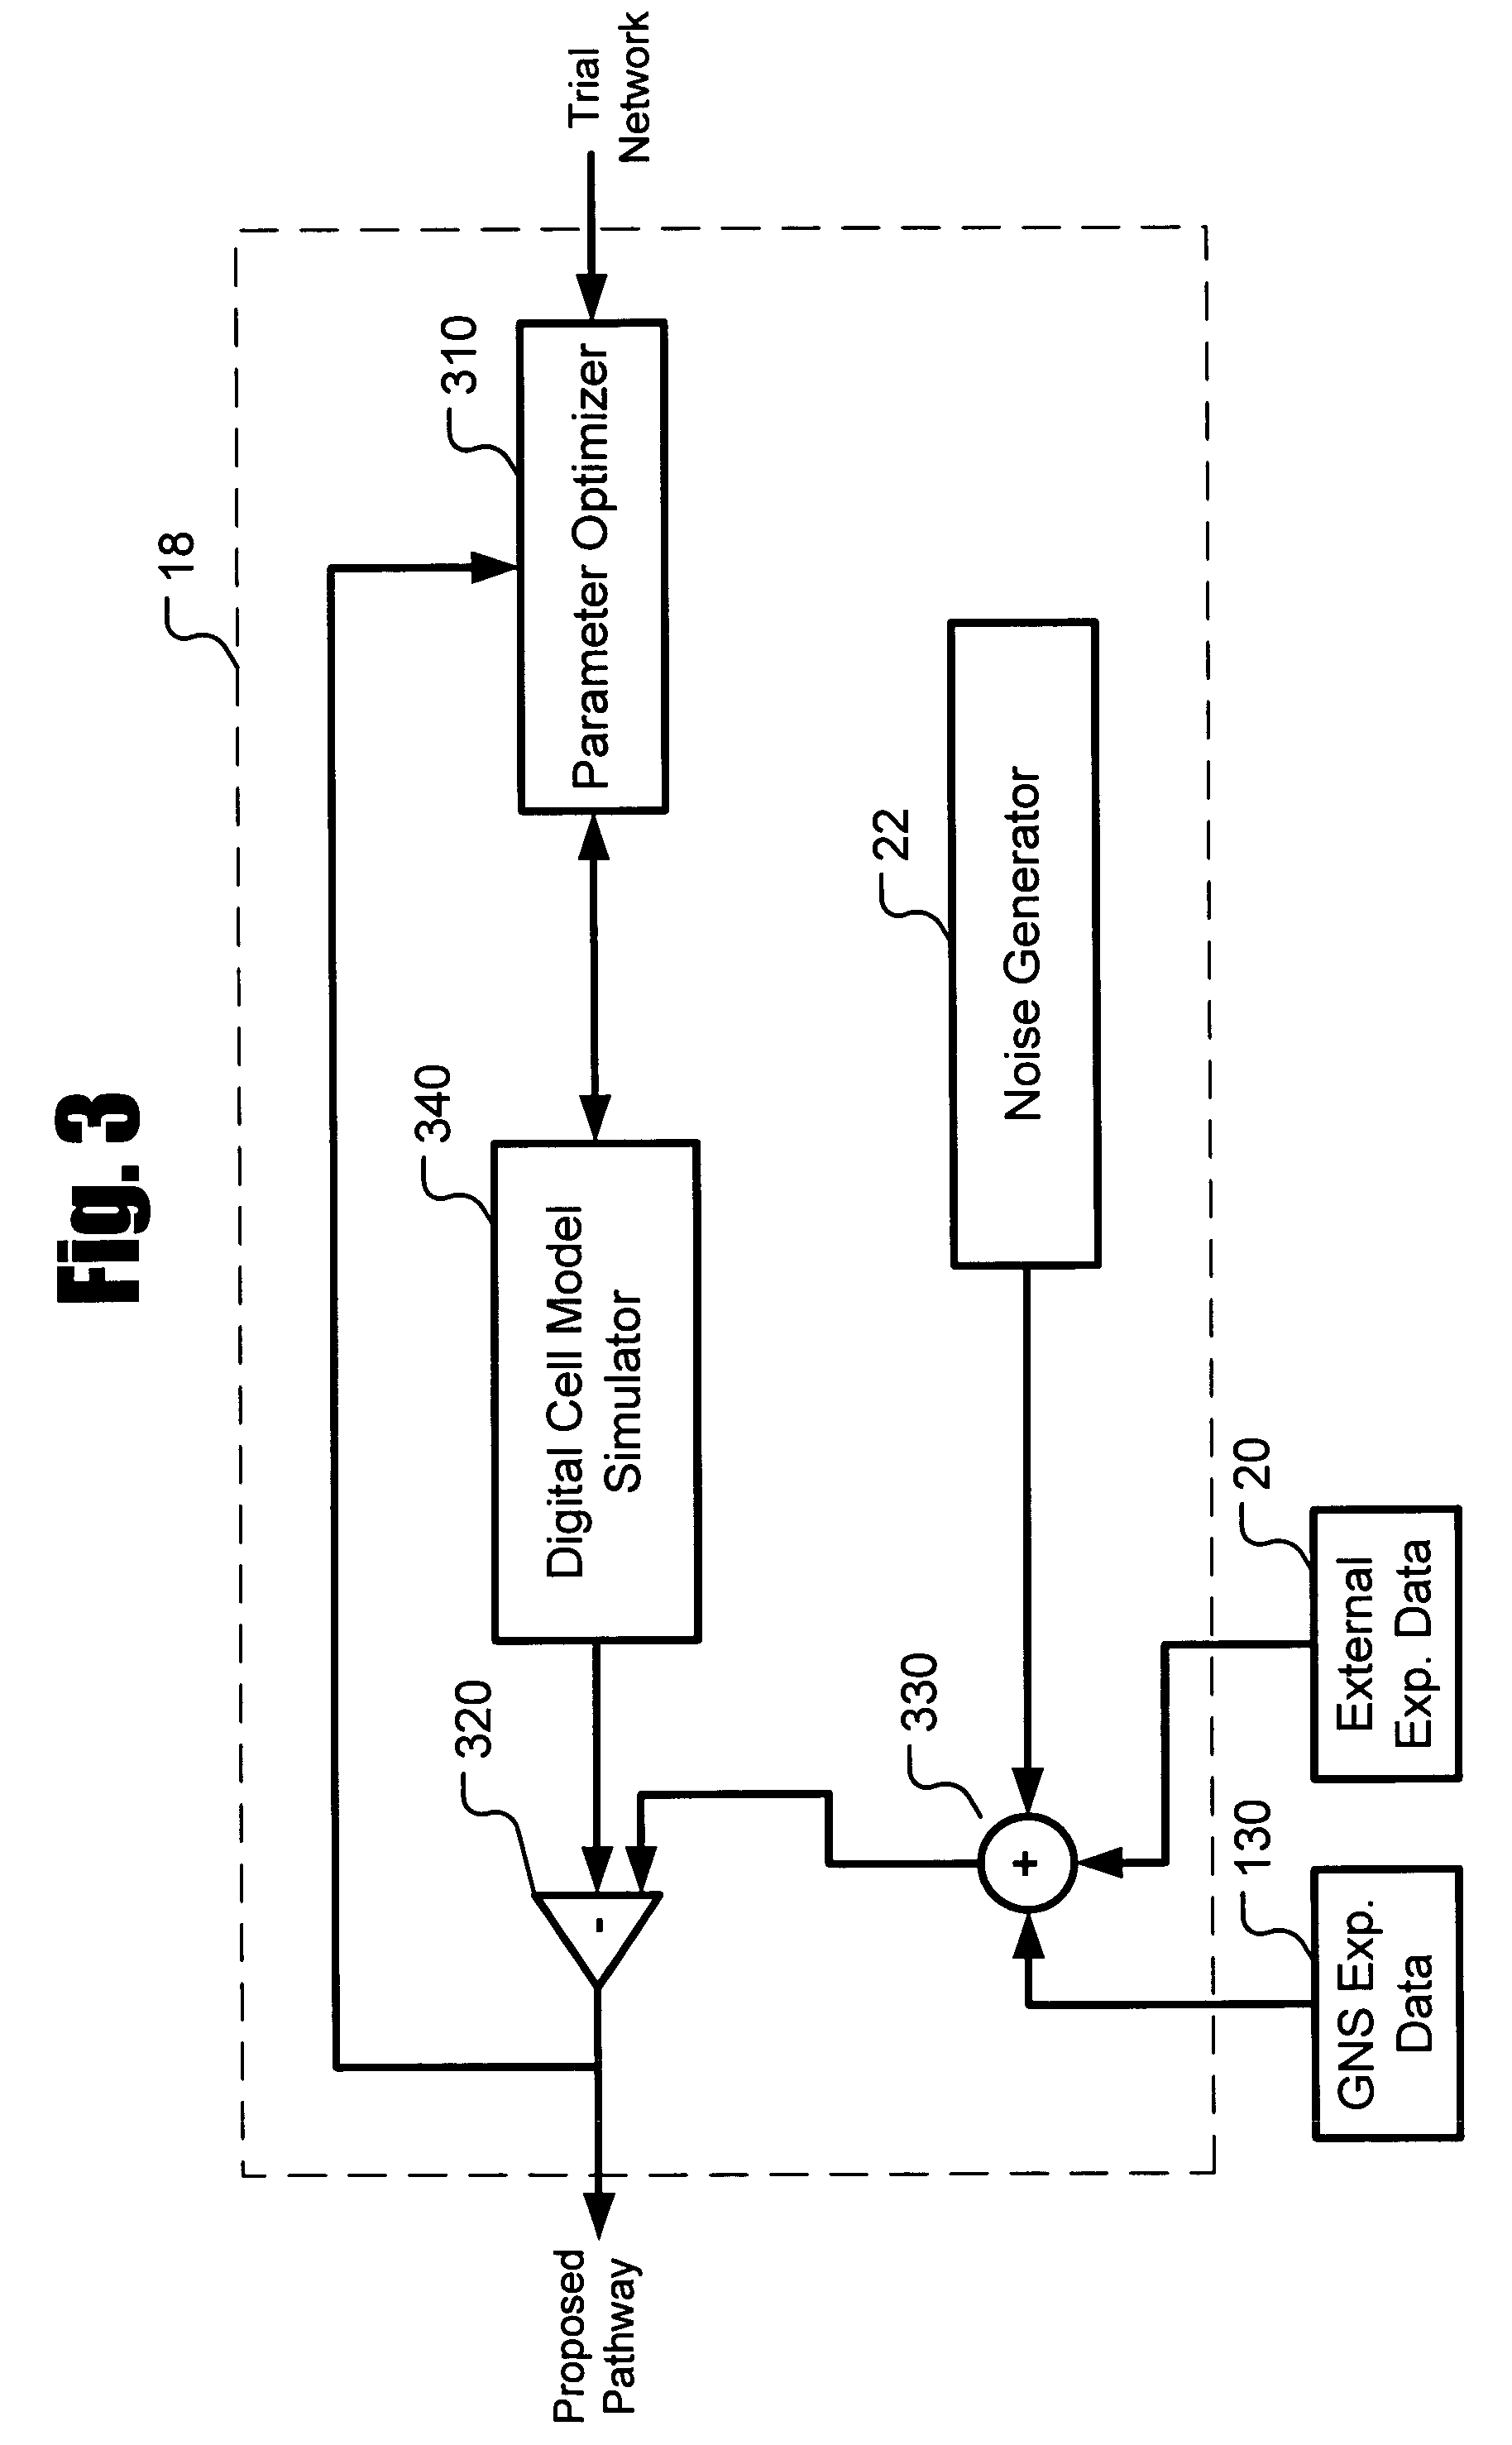 Systems and methods for inferring biological networks